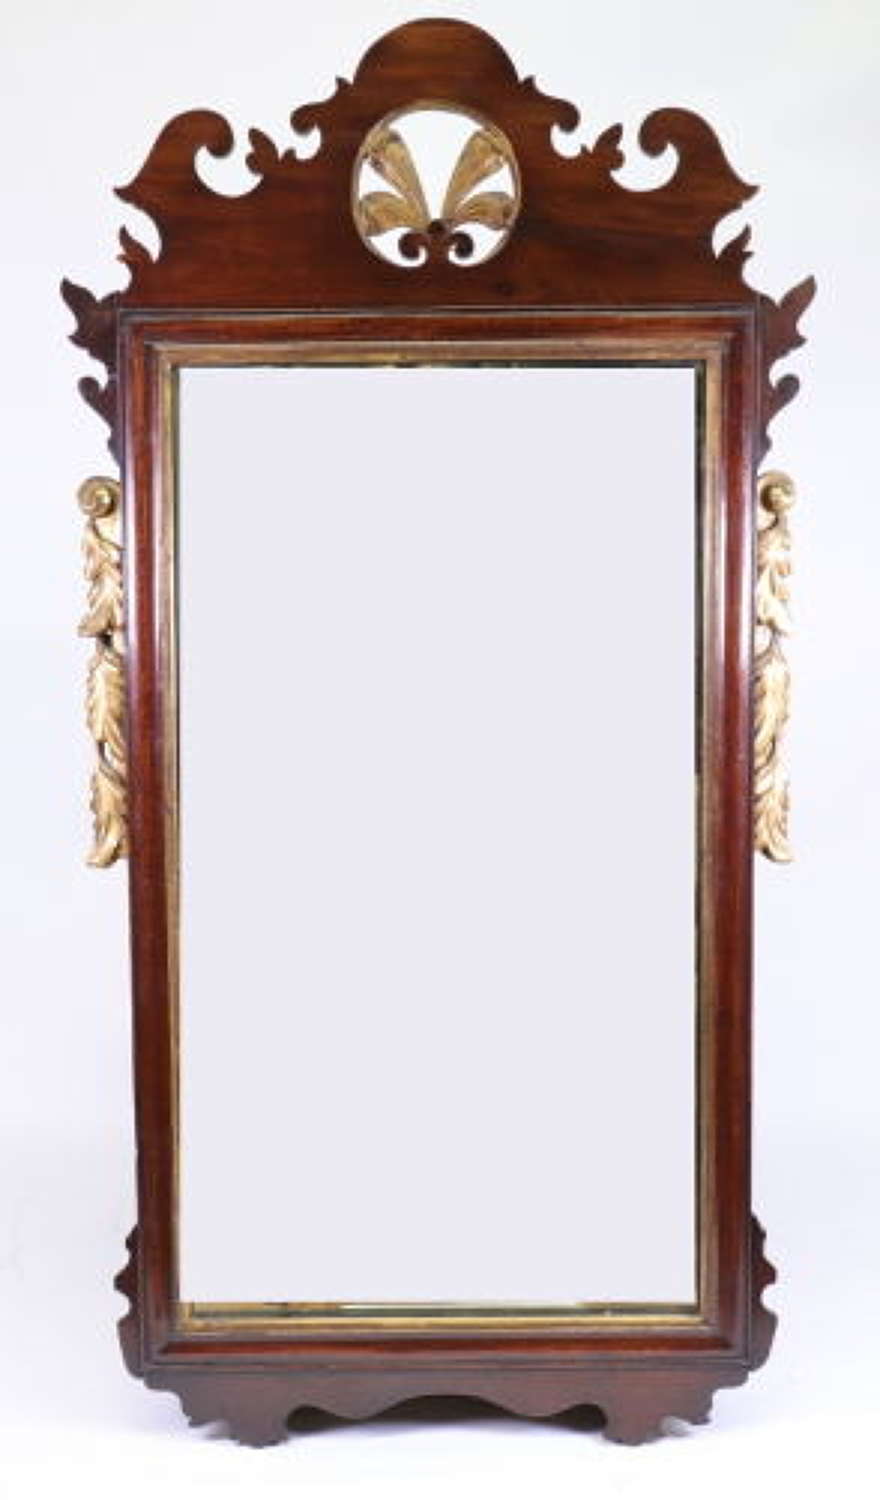 Chippendale Revival Wall Mirror c.1915